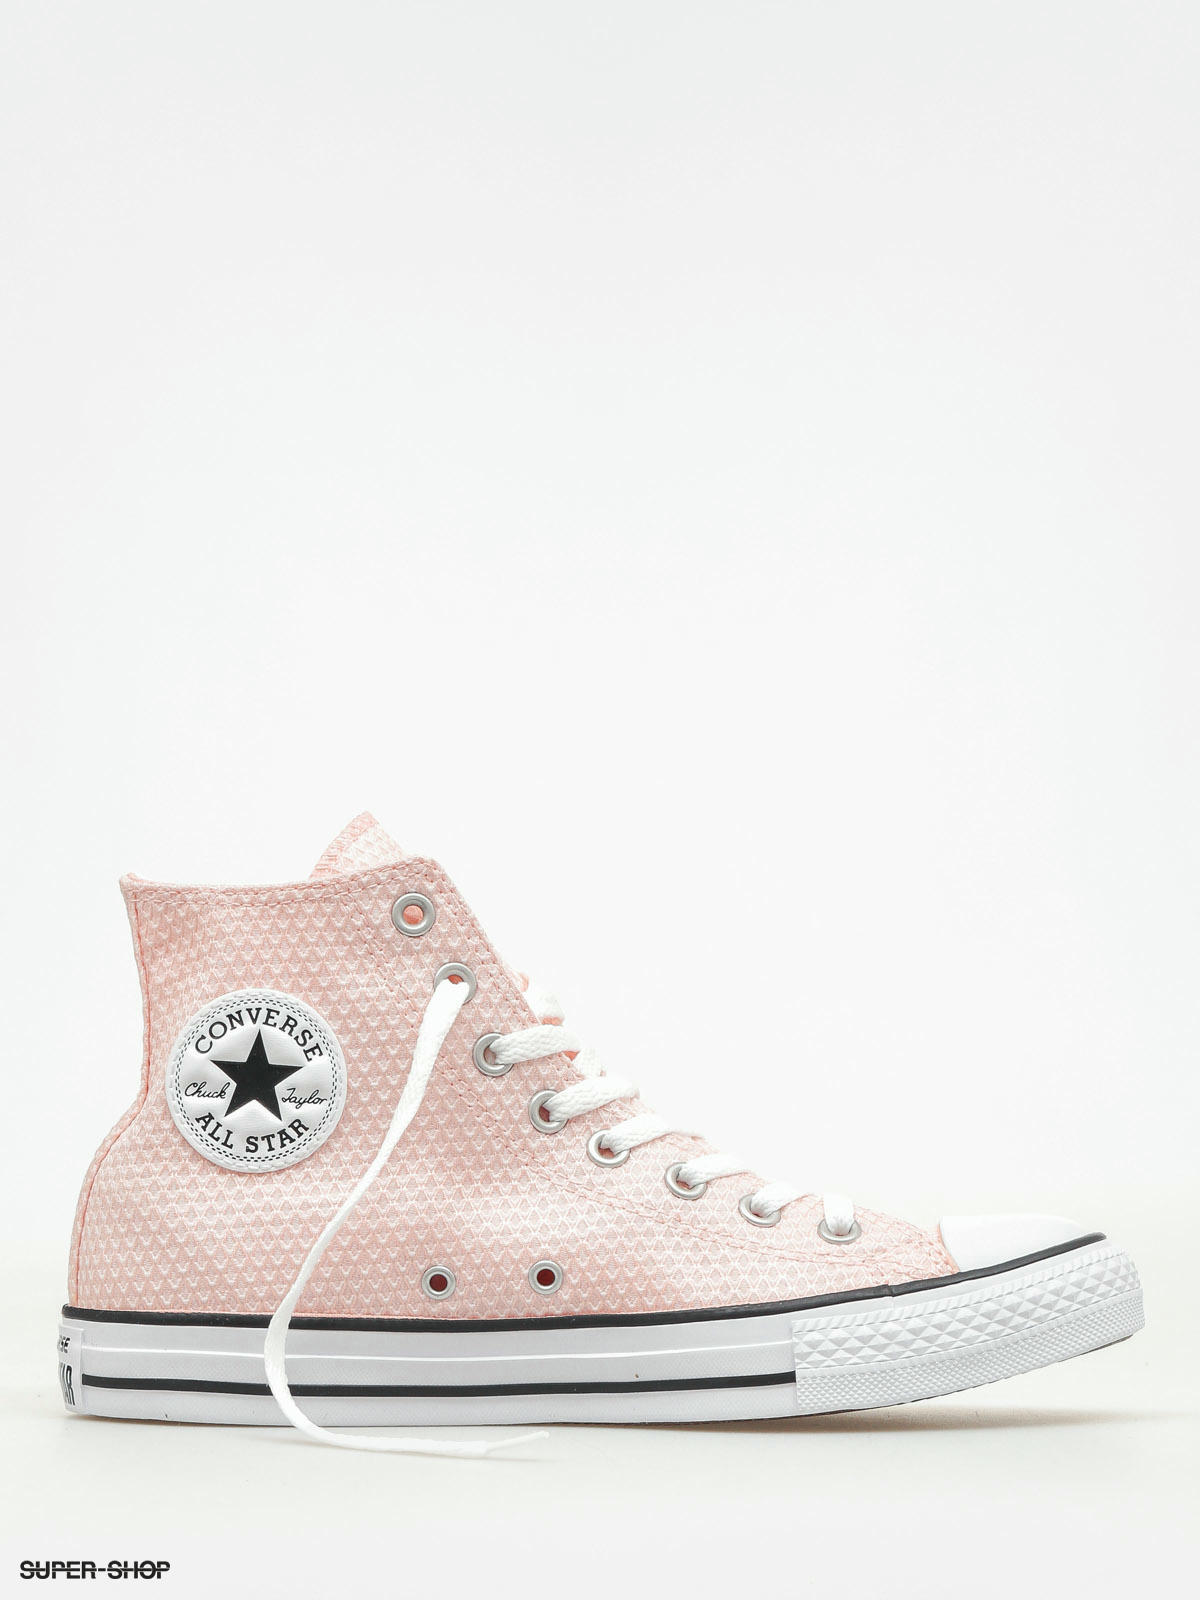 converse chuck taylor all star lo leather sneaker vapor pink